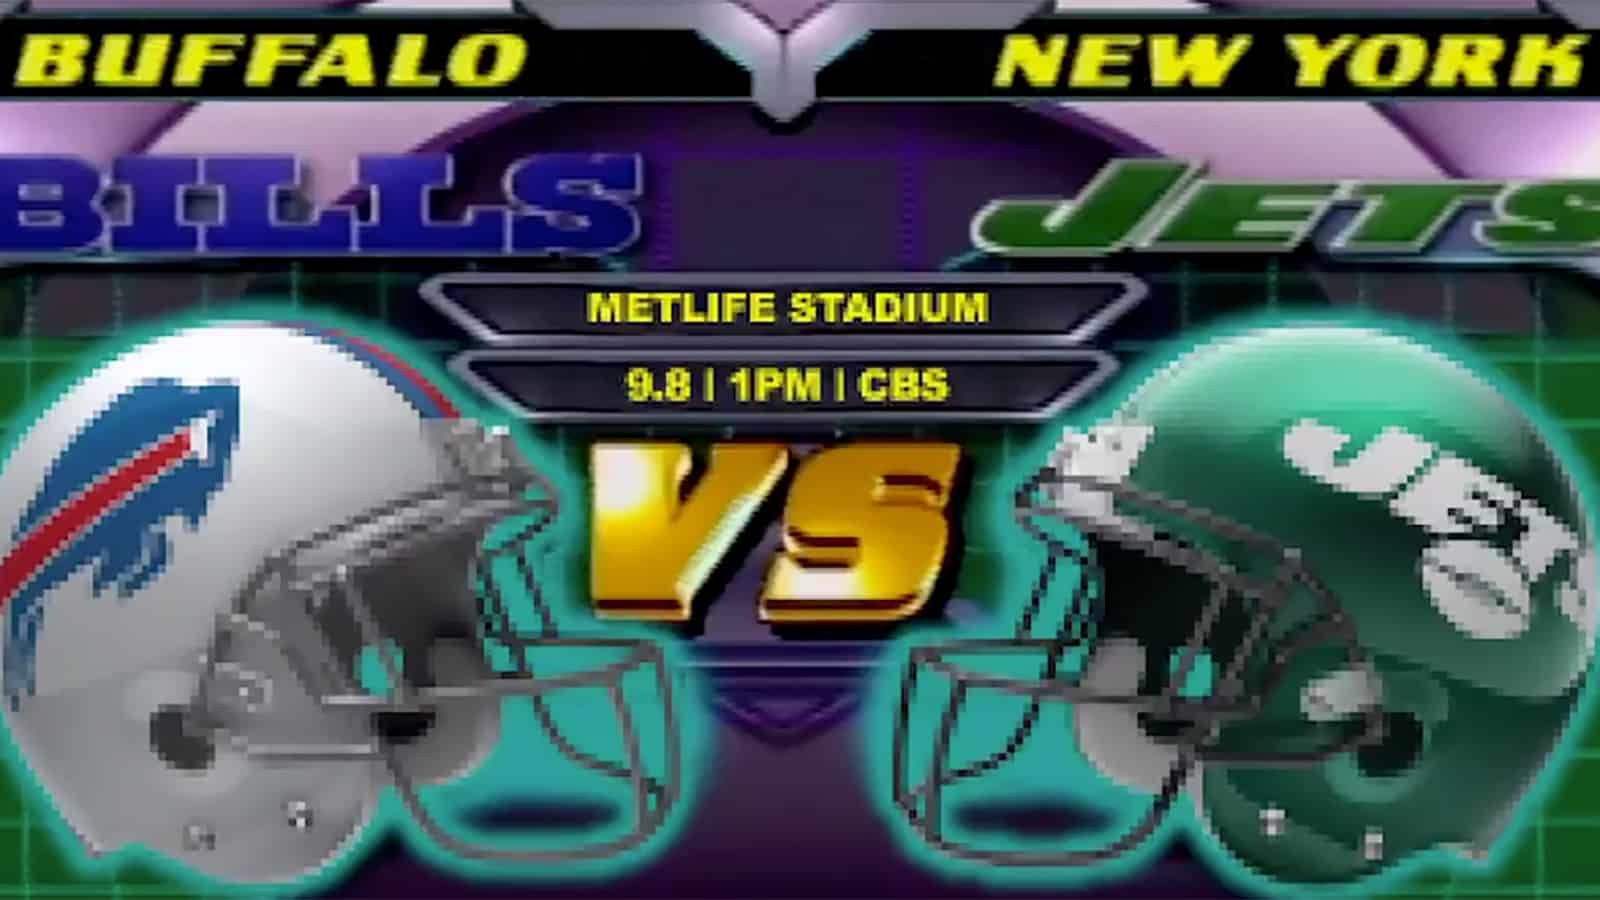 New York Jets brilliantly go full ‘NFL Blitz’ in schedule reveal video